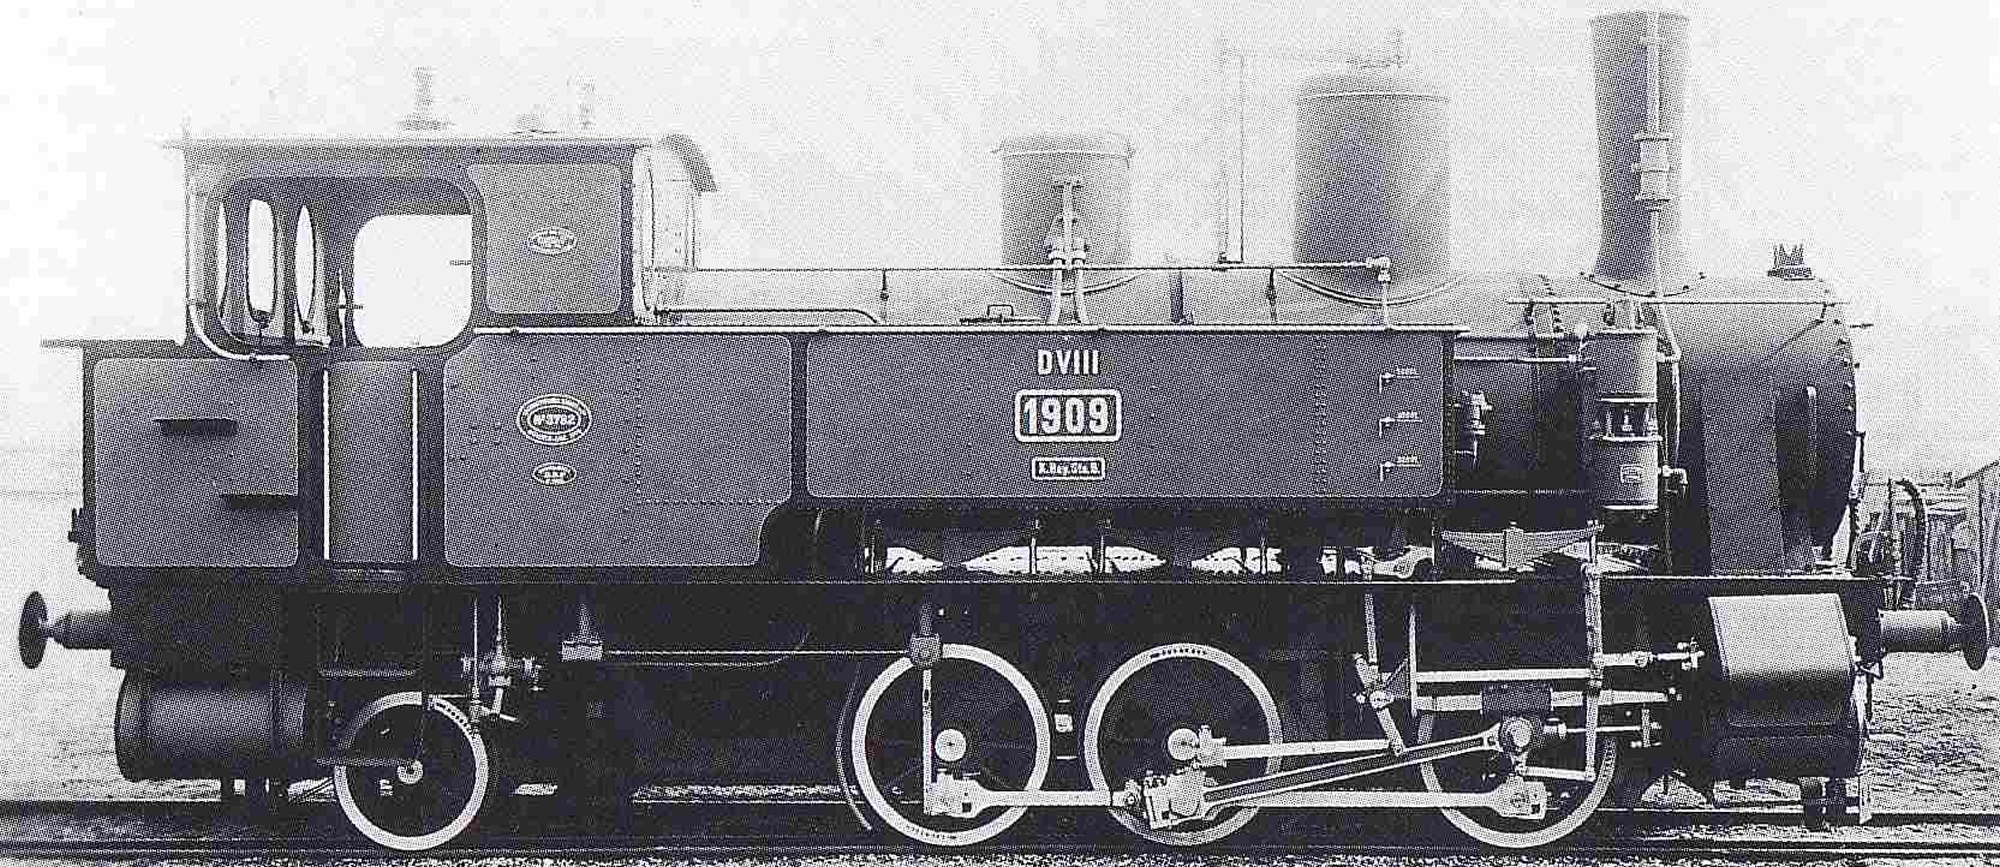 No. 1909 as delivered in 1898